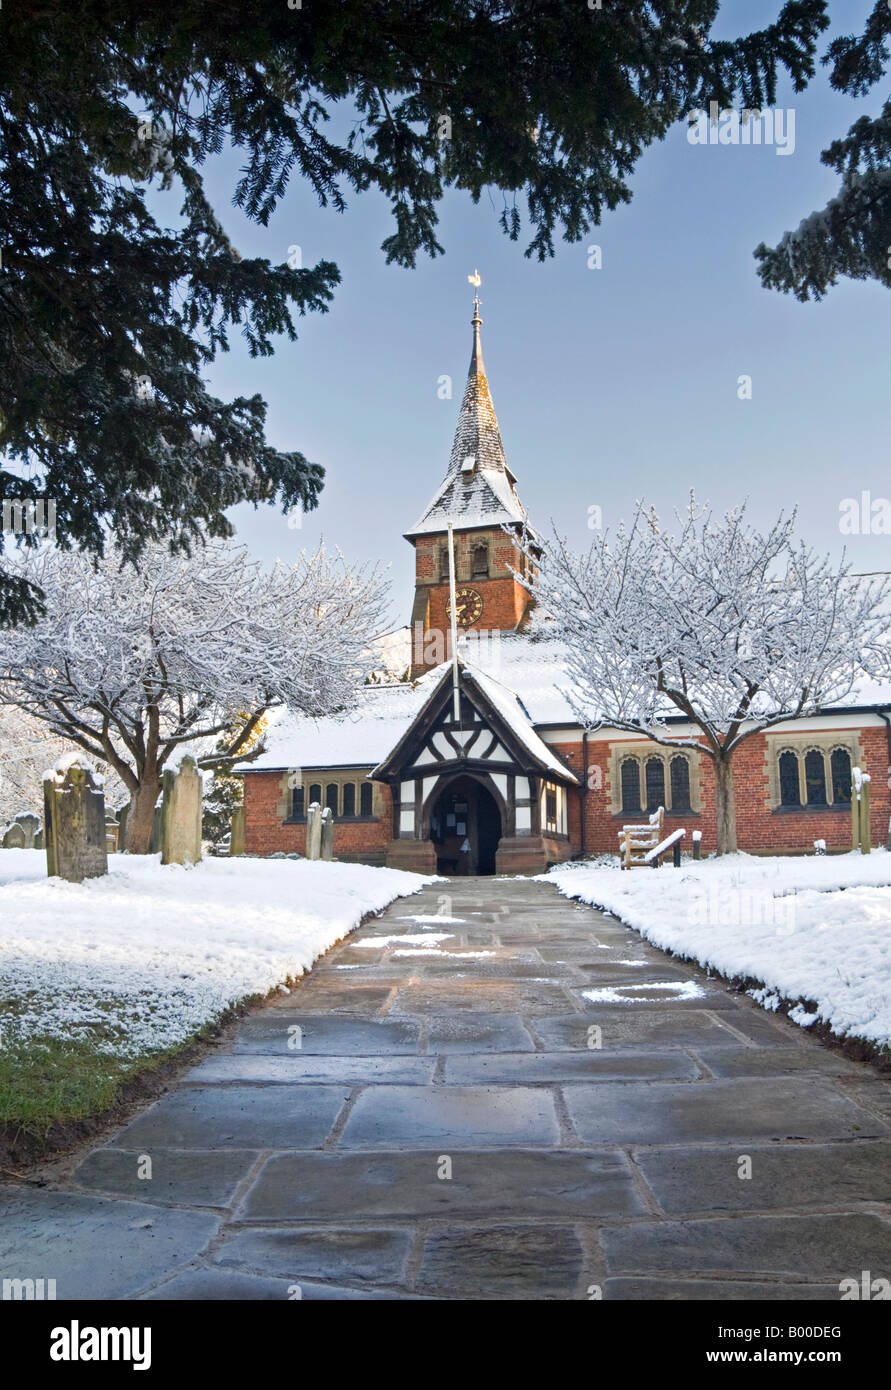 St Mary's Church a Traditional English Parish Church in Winter, Whitegate, Cheshire, England, UK Stock Photo